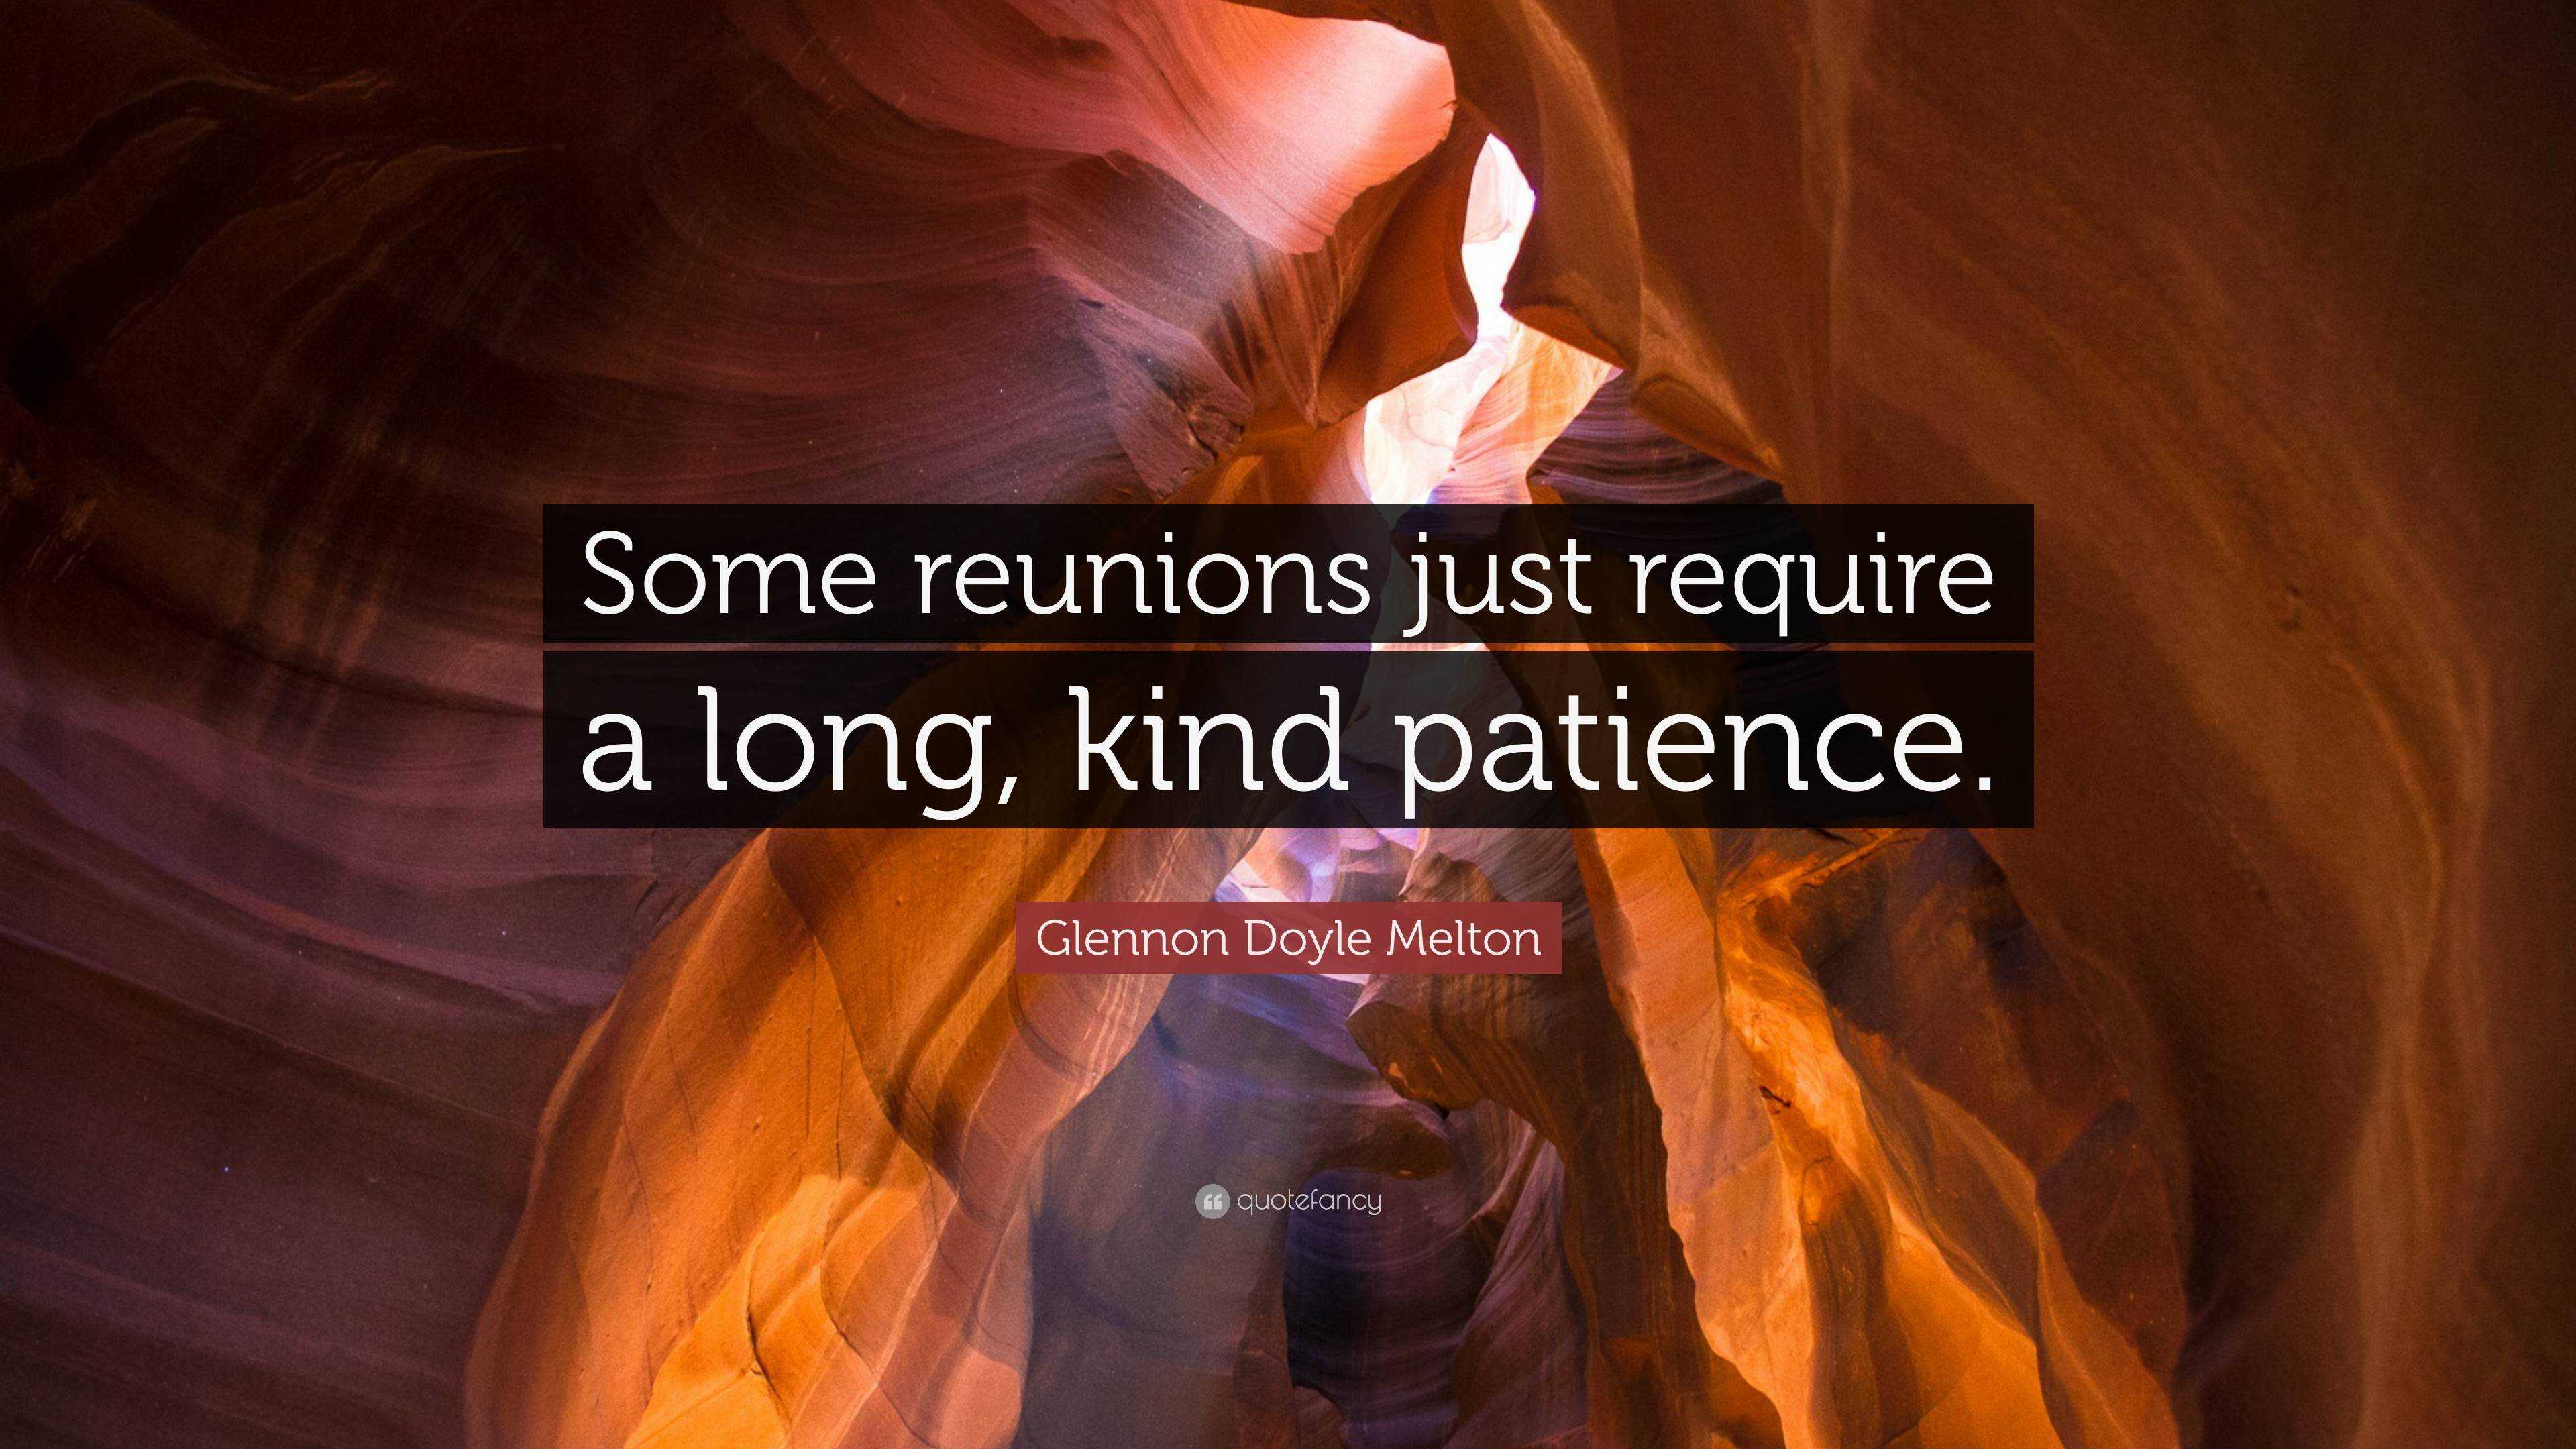 Glennon Doyle Melton Quote: “Some reunions just require a long, kind